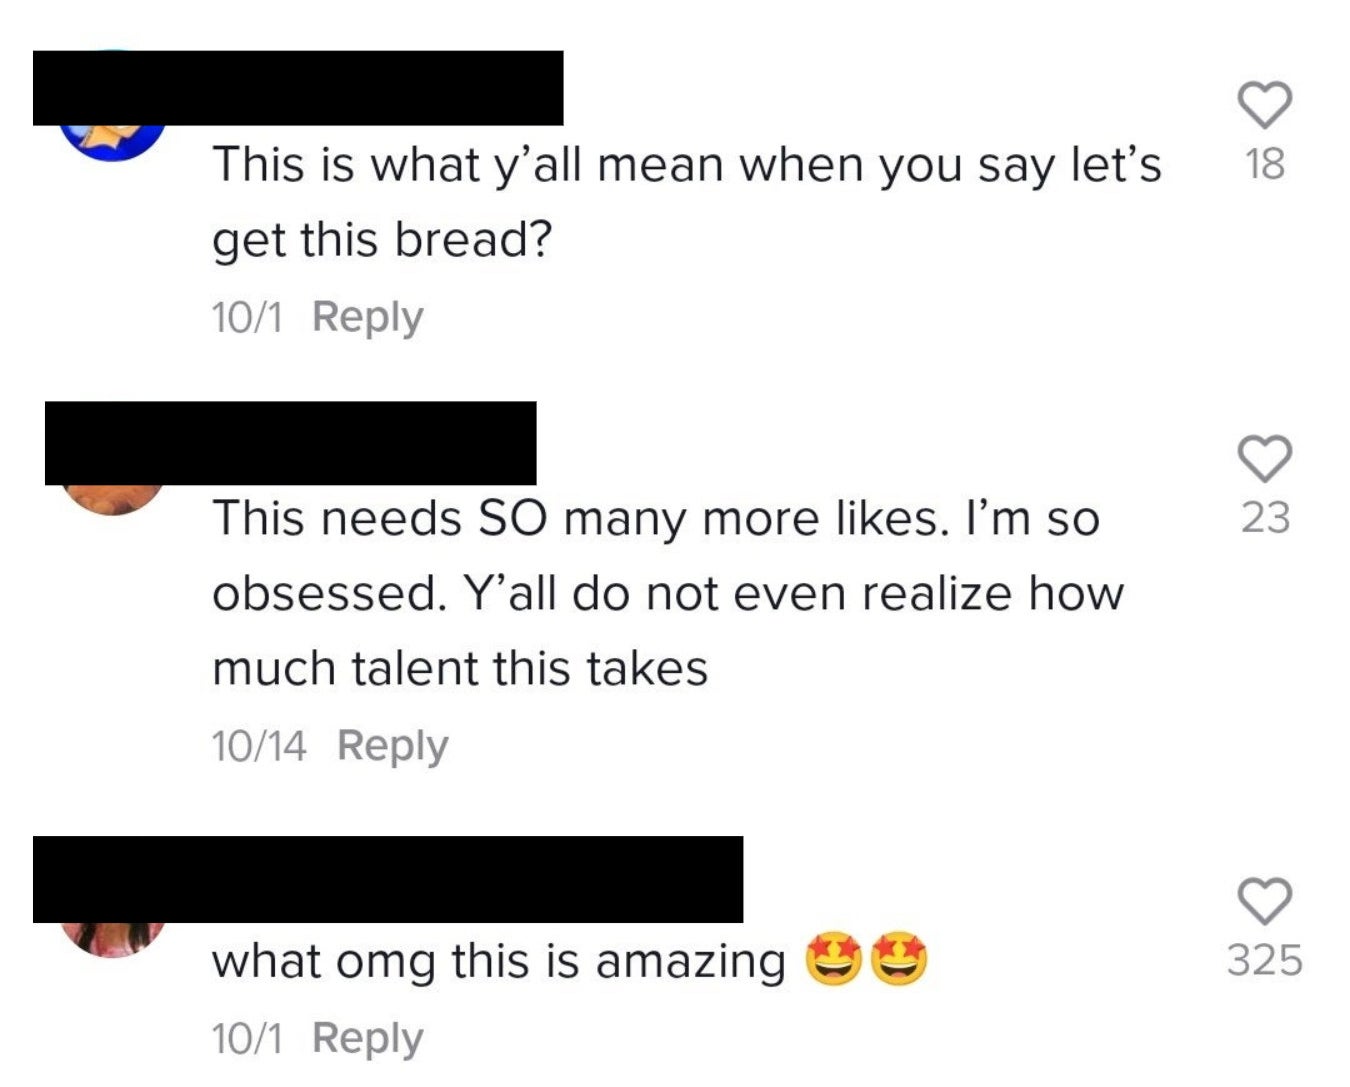 A comment says, &quot;This is what y&#x27;all mean when you say let&#x27;s get this bread?&quot; next to another that says, &quot;This needs so many more likes; I&#x27;m so obsessed; y&#x27;all do not even realize how much talent this takes&quot; and a final comment: &quot;What omg this is amazing&quot;